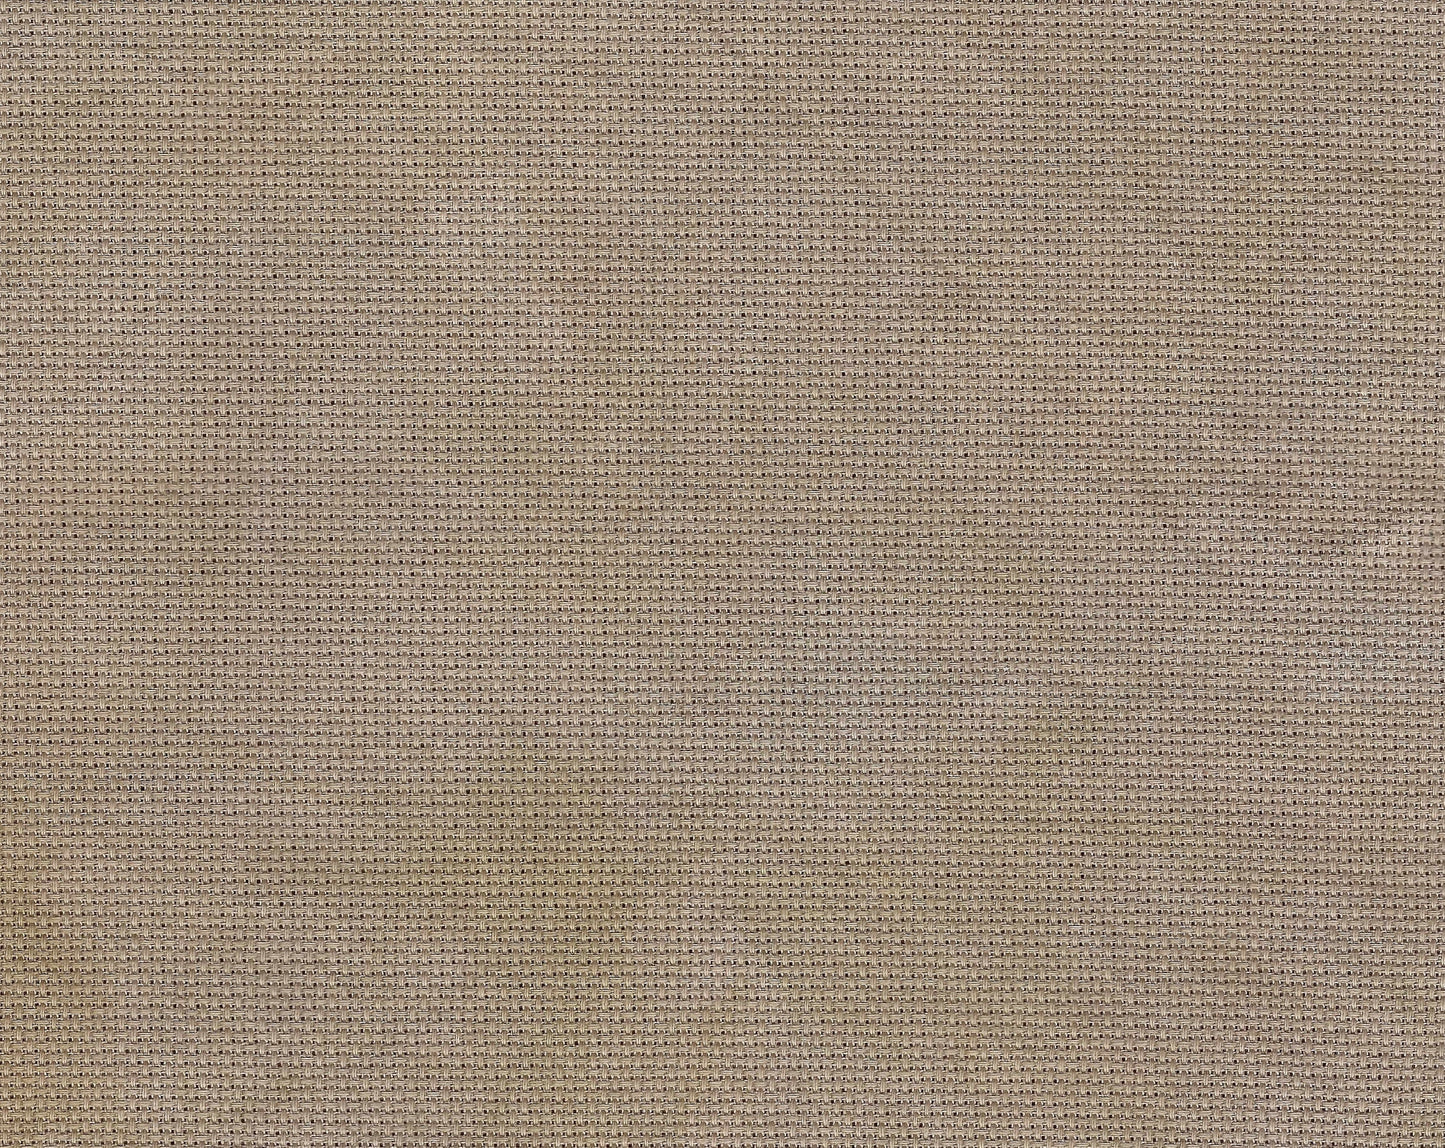 32 Count Linen Driftwood - Fabrics by Stephanie, Fabric, The Crafty Grimalkin - A Cross Stitch Store